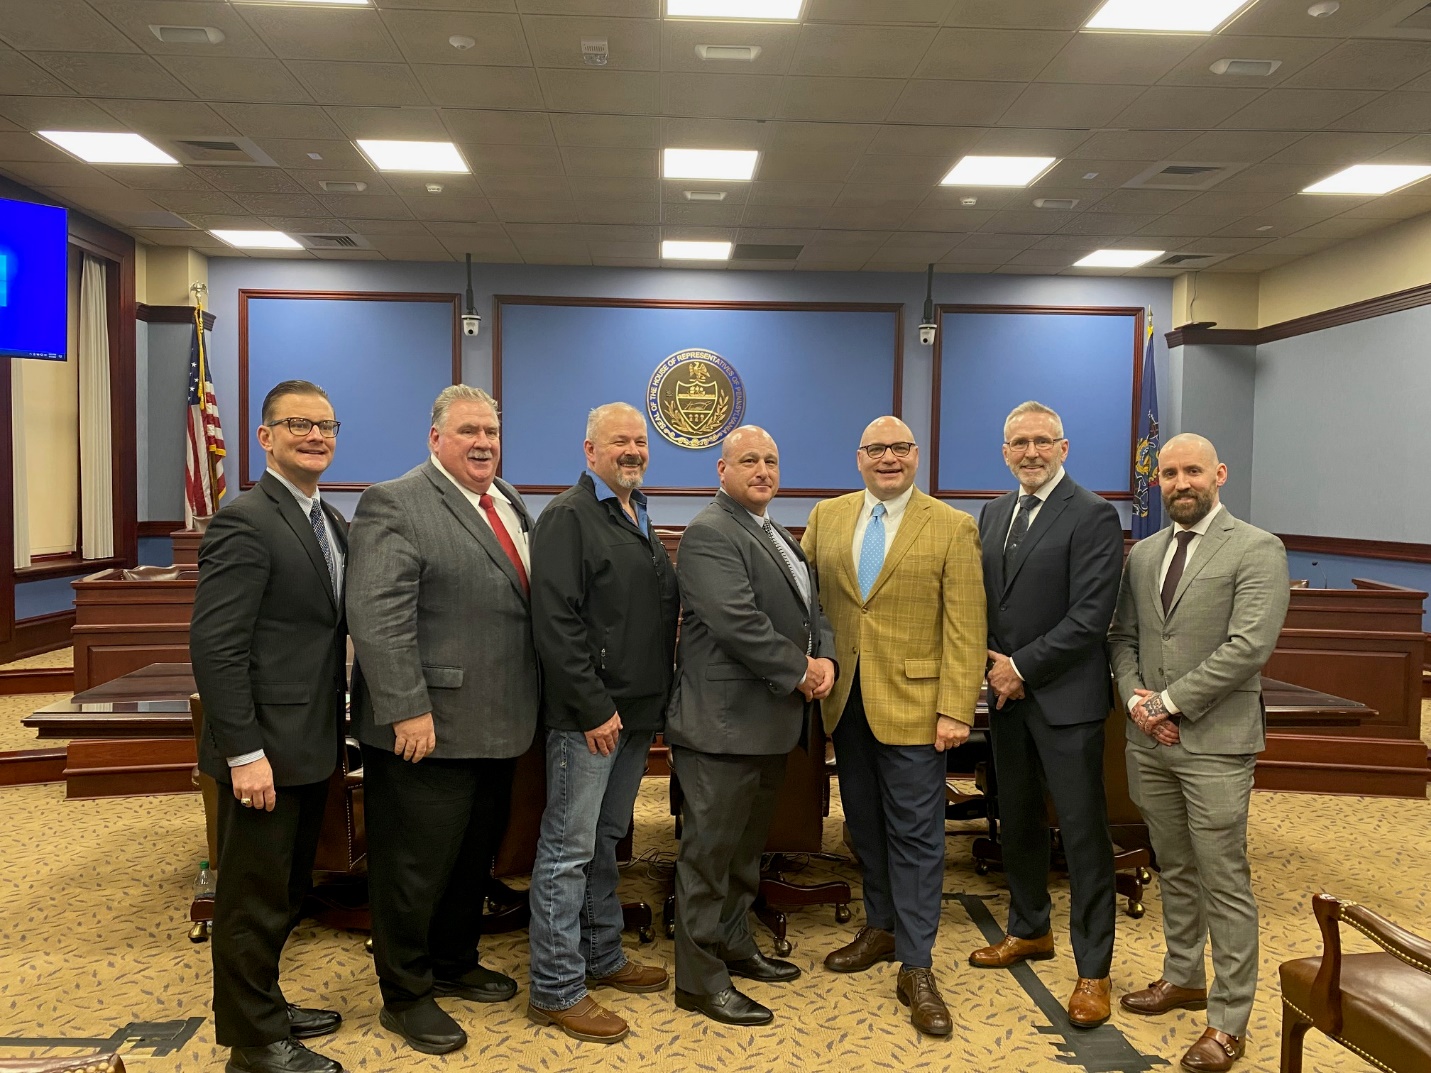 From left to right: Micheal Oscar, Oscar Policy Group; Pete Ielmini Mechanical Insulators LMCT Executive Director; Ronnie Beverly, Local 23 Business Manager; Robert Celluci, Local 14 Business Manager; Rep. Robert F. Matzie (D-Ambridge), House Consumer Protection, Technology and Utilities Committee Co-Chair; James Cassidy, Local 2 Business Manager and Tip Wright, Local 38 Business Manager. Not pictured are William B. McGee, International Jurisdictional Director and former Local 23 Business Manager, and Steve Petit, Local 14 Business Manager.